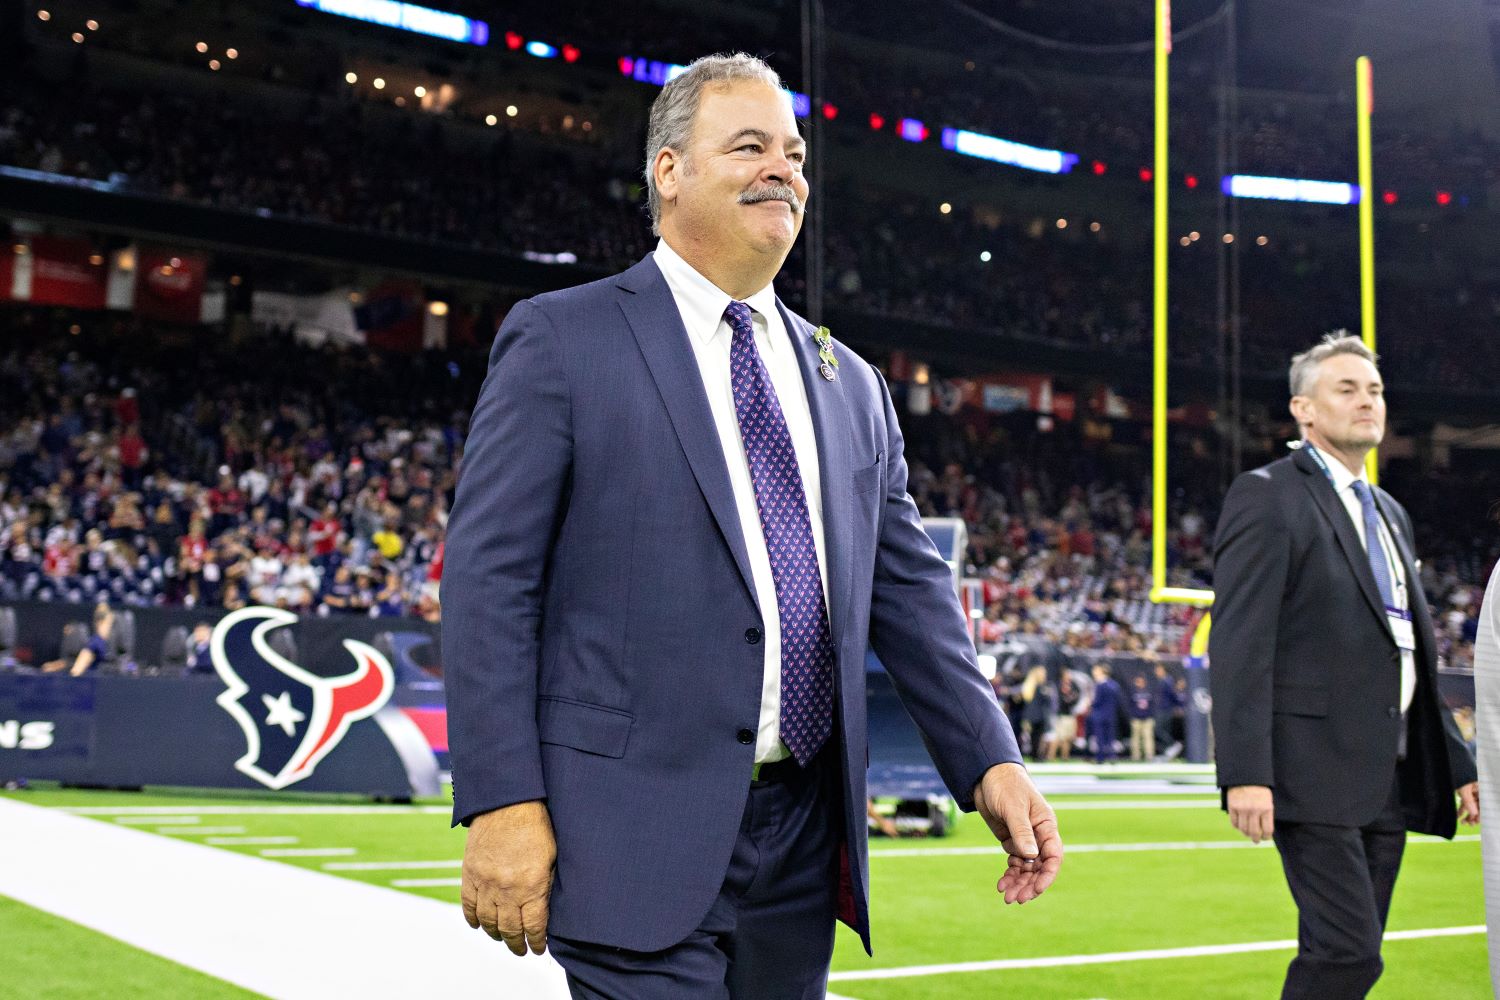 With former public relations director Amy Palcic hiring a lawyer, the Houston Texans have a potential legal fiasco on their hands.